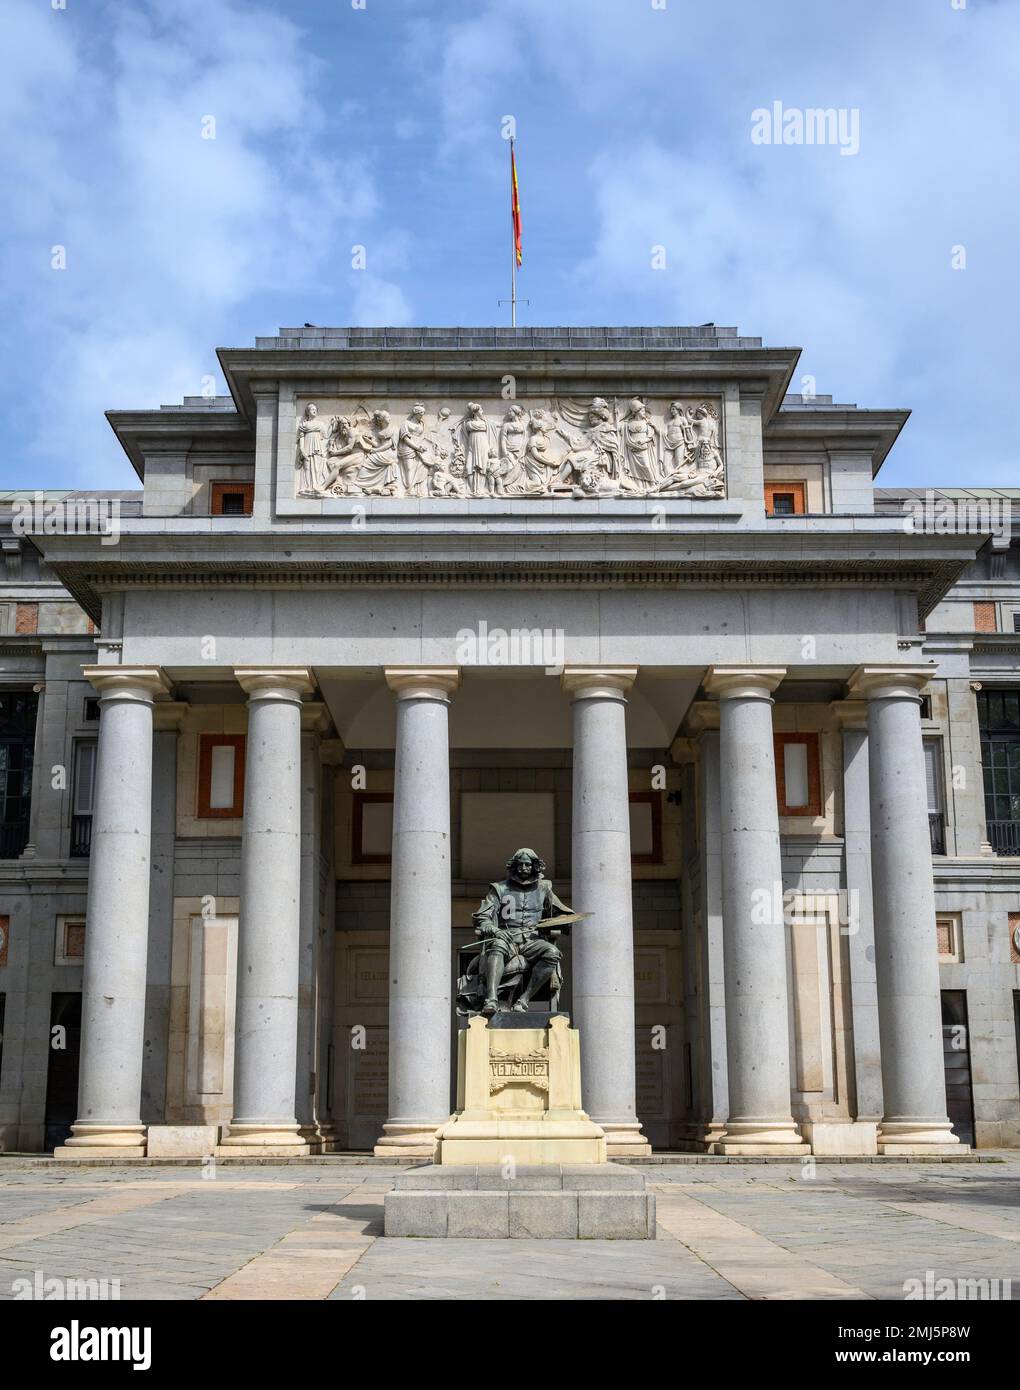 Entrance to the Prado Museum in Madrid, Spain, with a statue of painter Diego Velázquez. Stock Photo